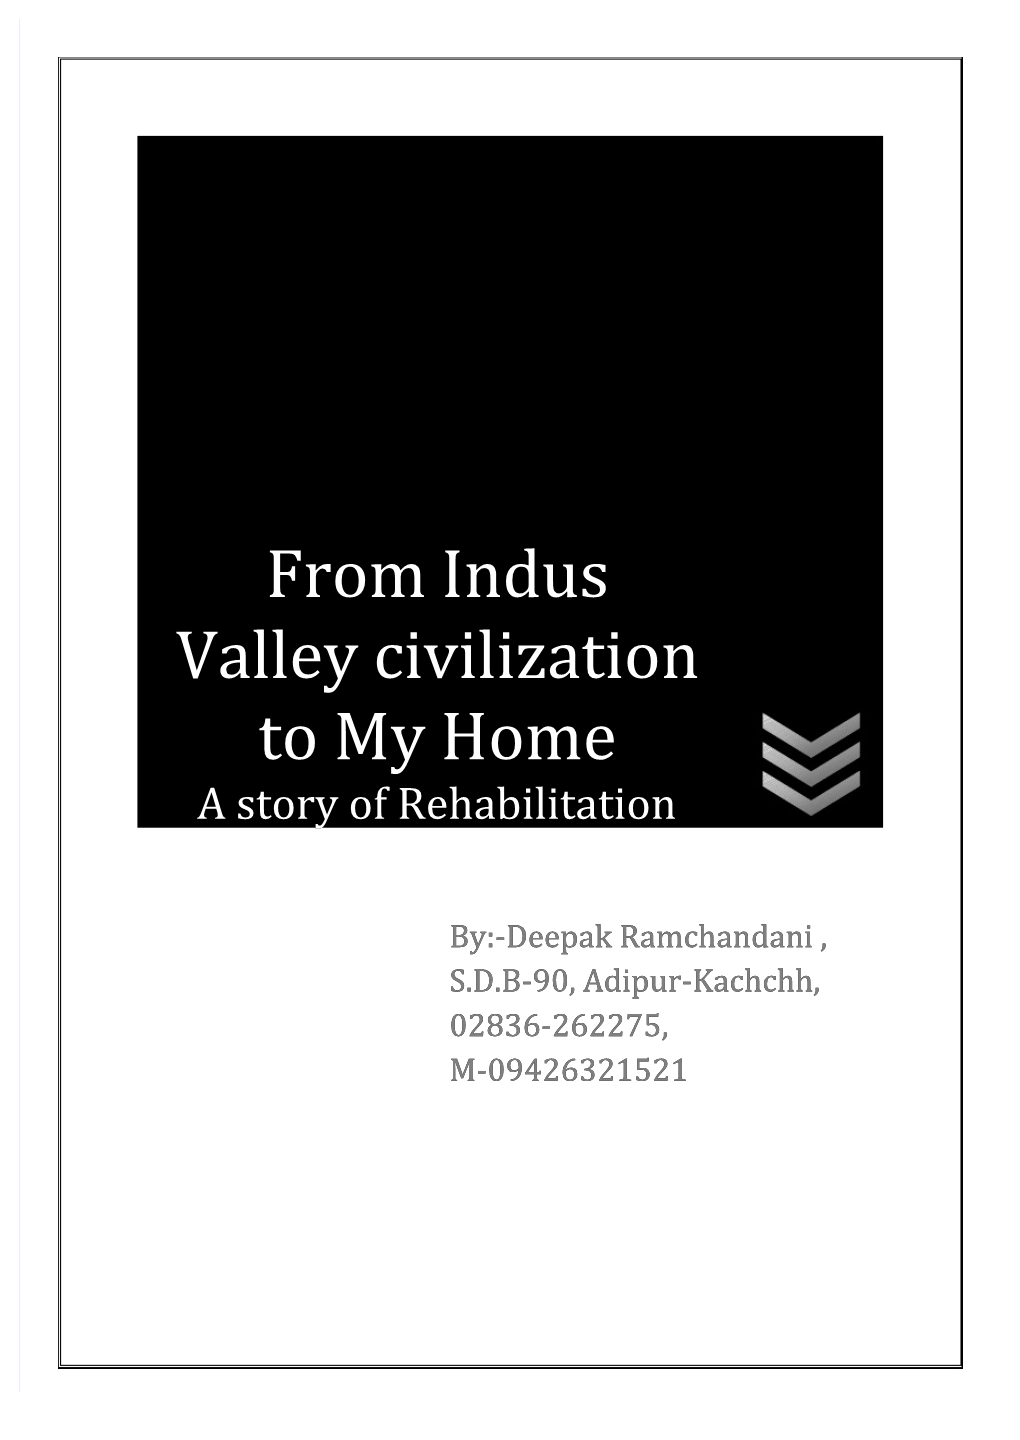 From Indus Valley Civilization to My Home a Story of Rehabilitation